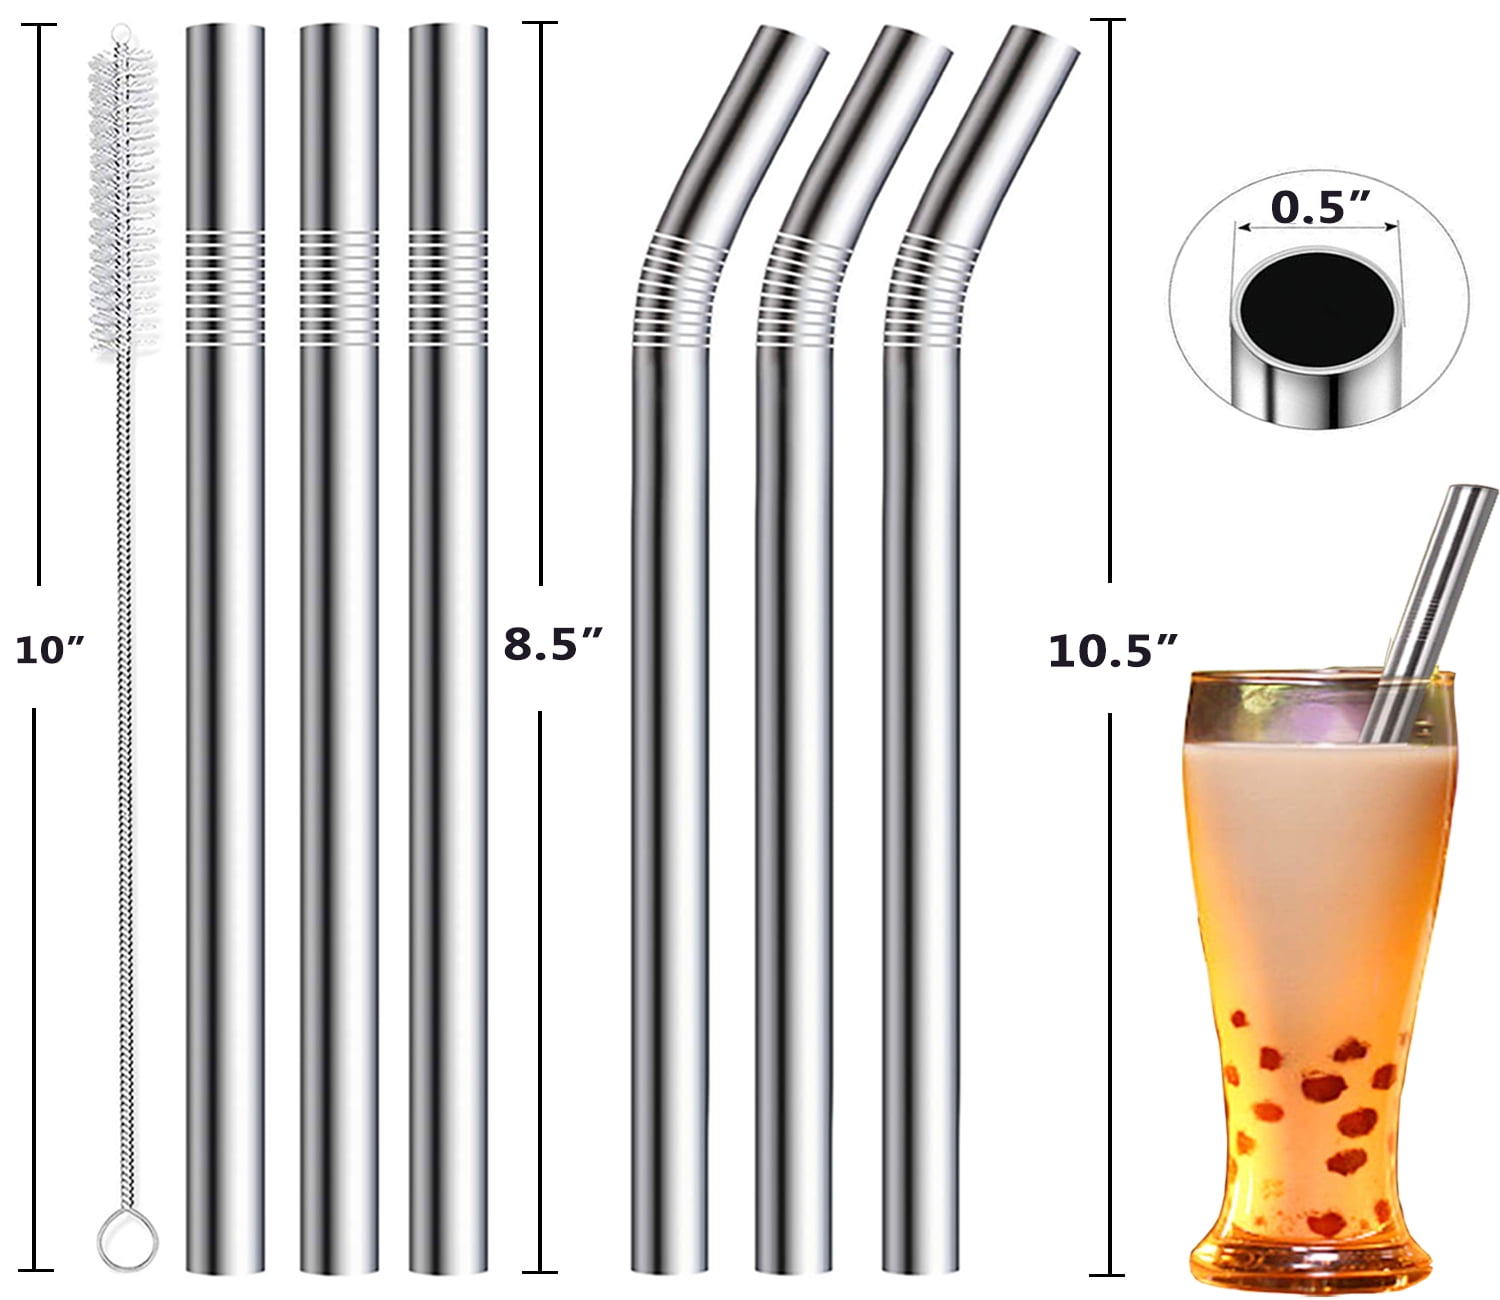 KEWLYSEU Metal Stainless Steel Straws, 4pcs 12 Ultra Long Reusable Metal Drinking Straws with Cleaning Brush and Silicone Tips for Tall Tumblers